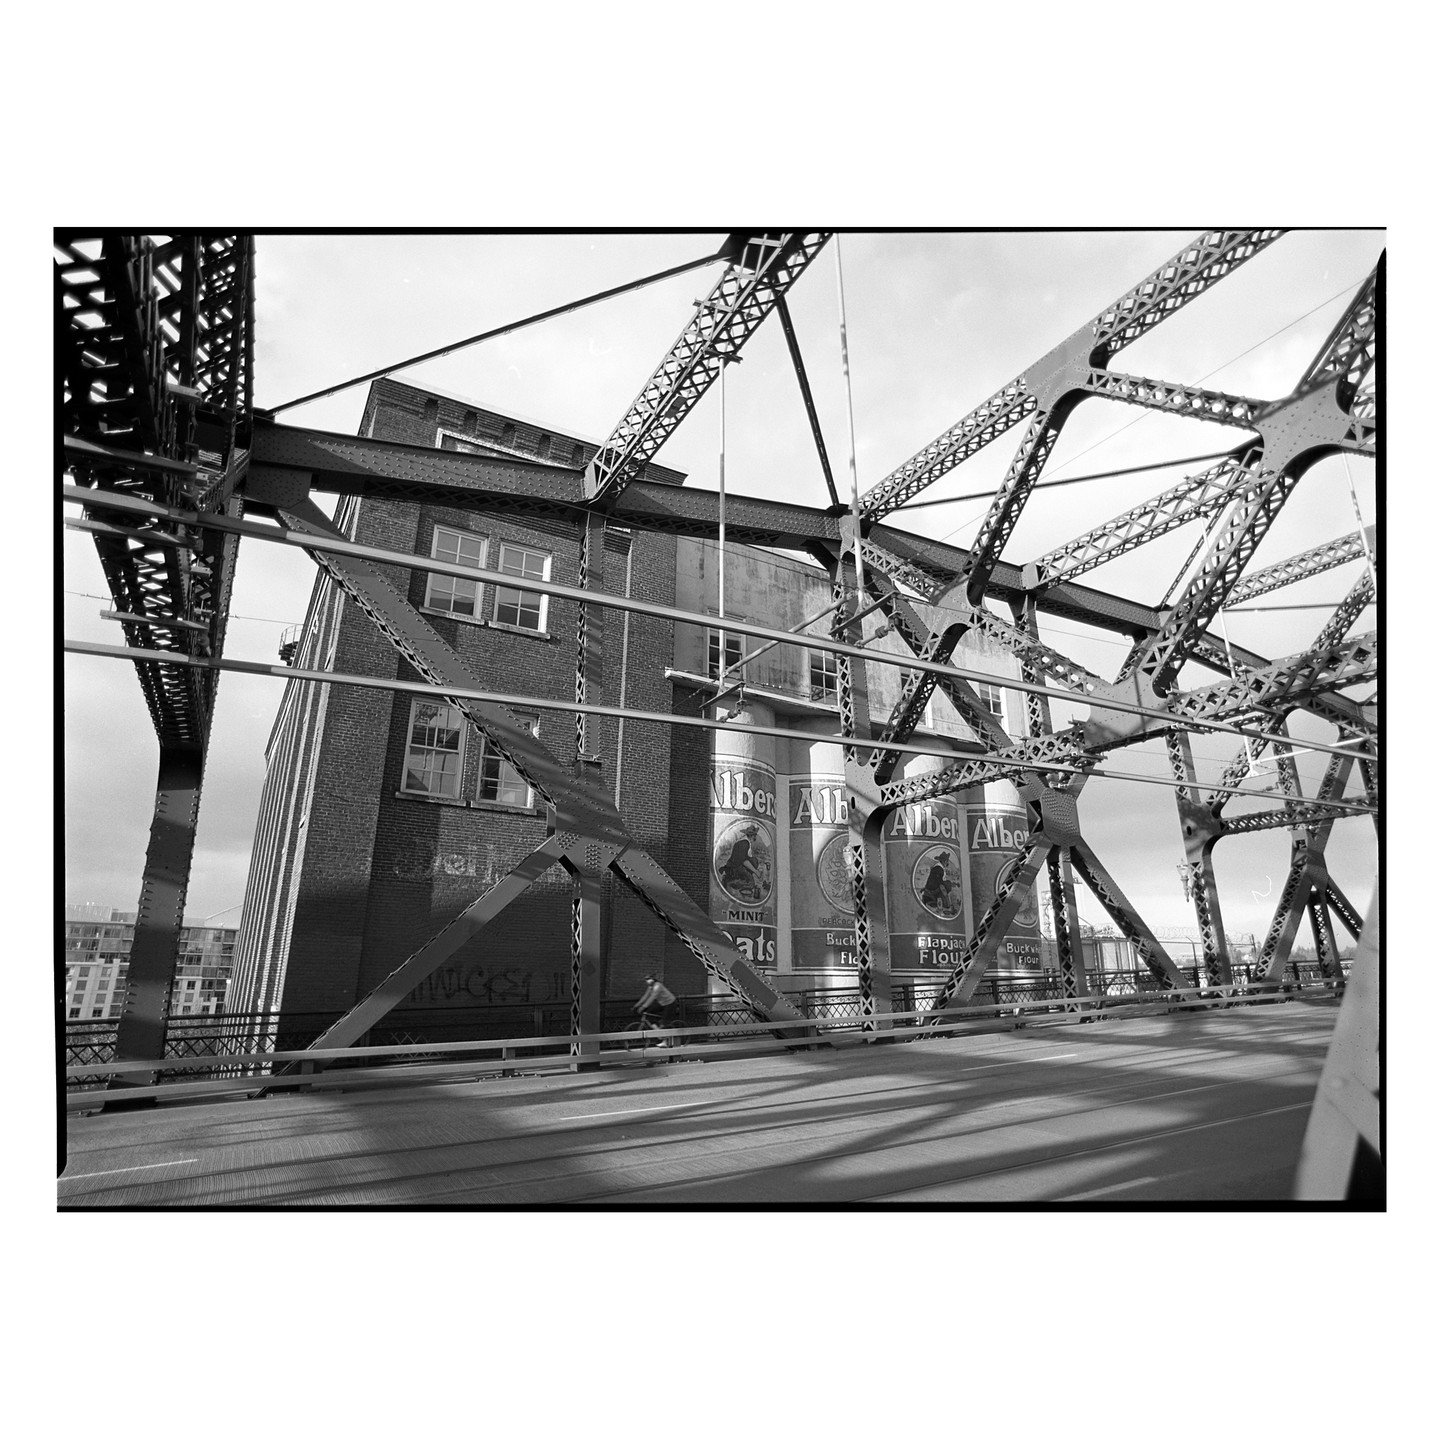 Walking the Broadway Bridge on a gloriously sunny afternoon. I tend to enjoy the sunshine of spring for about two days, then I grave the gloomy winter again. But hey, at least I got outdoors!
.
#filmphotography #fineart #streetphotography #portland #